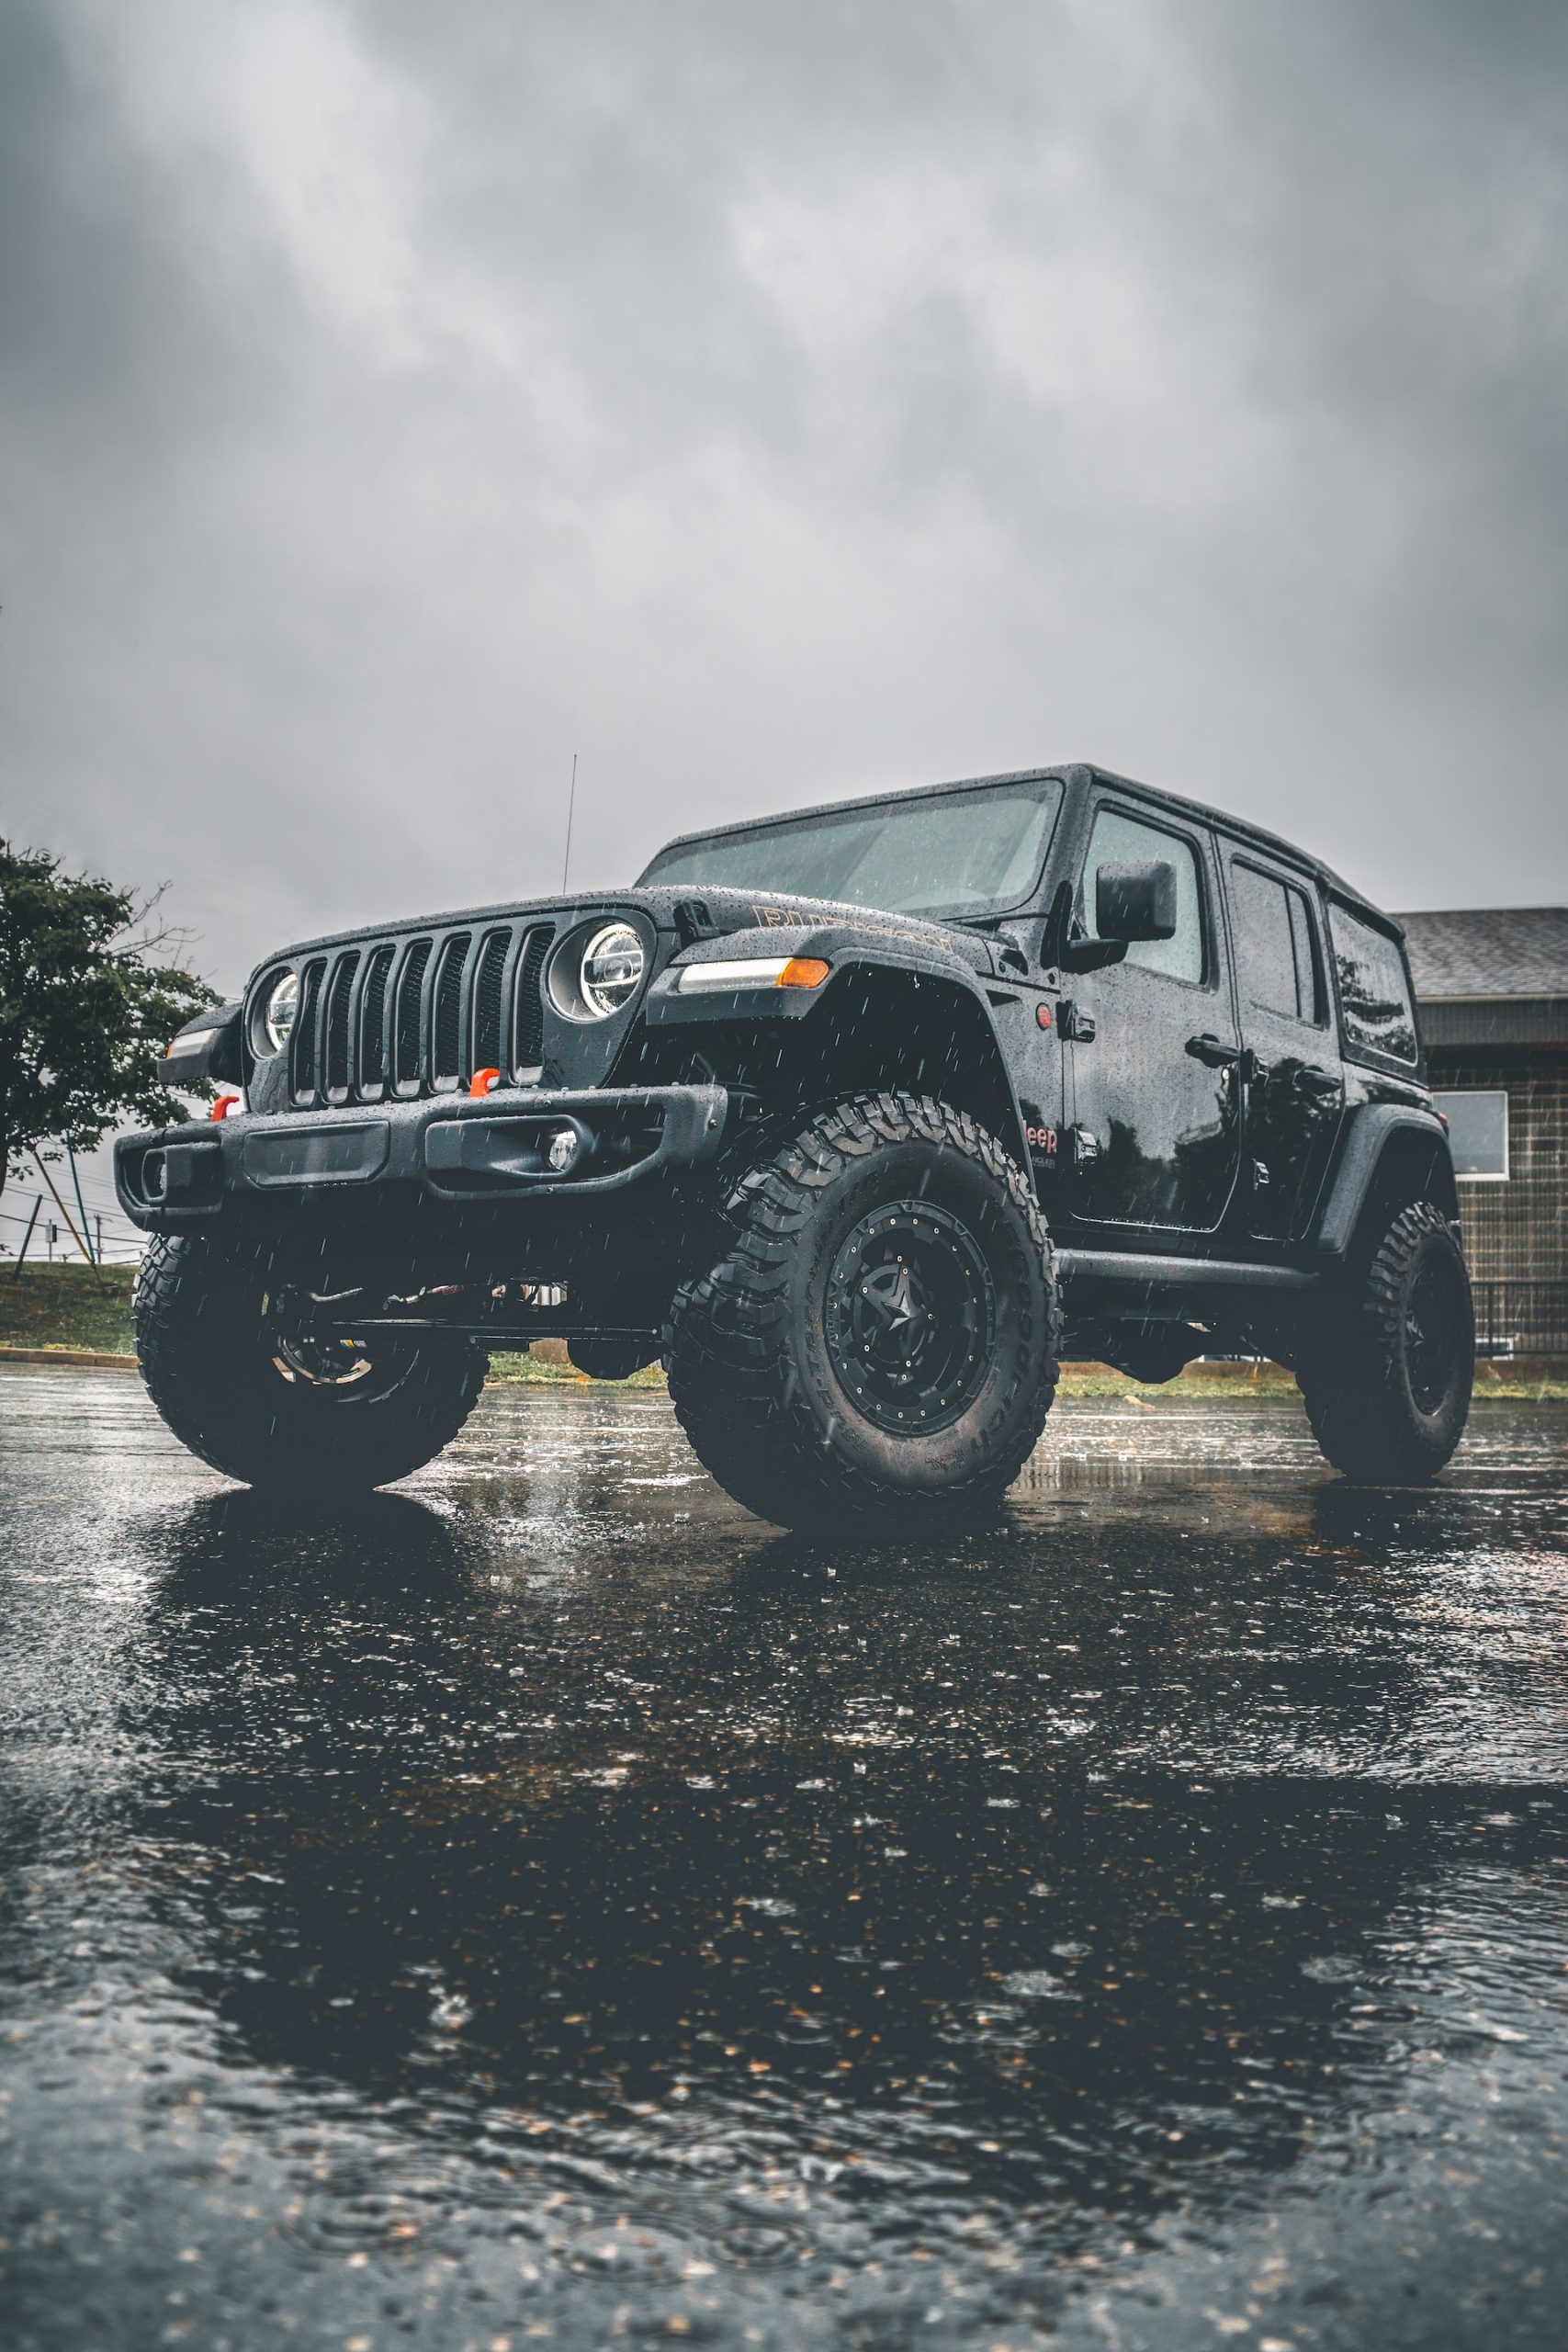 Reasons Why Your Jeep Wrangler Is Leaking Water Underneath | Off Road Ranker